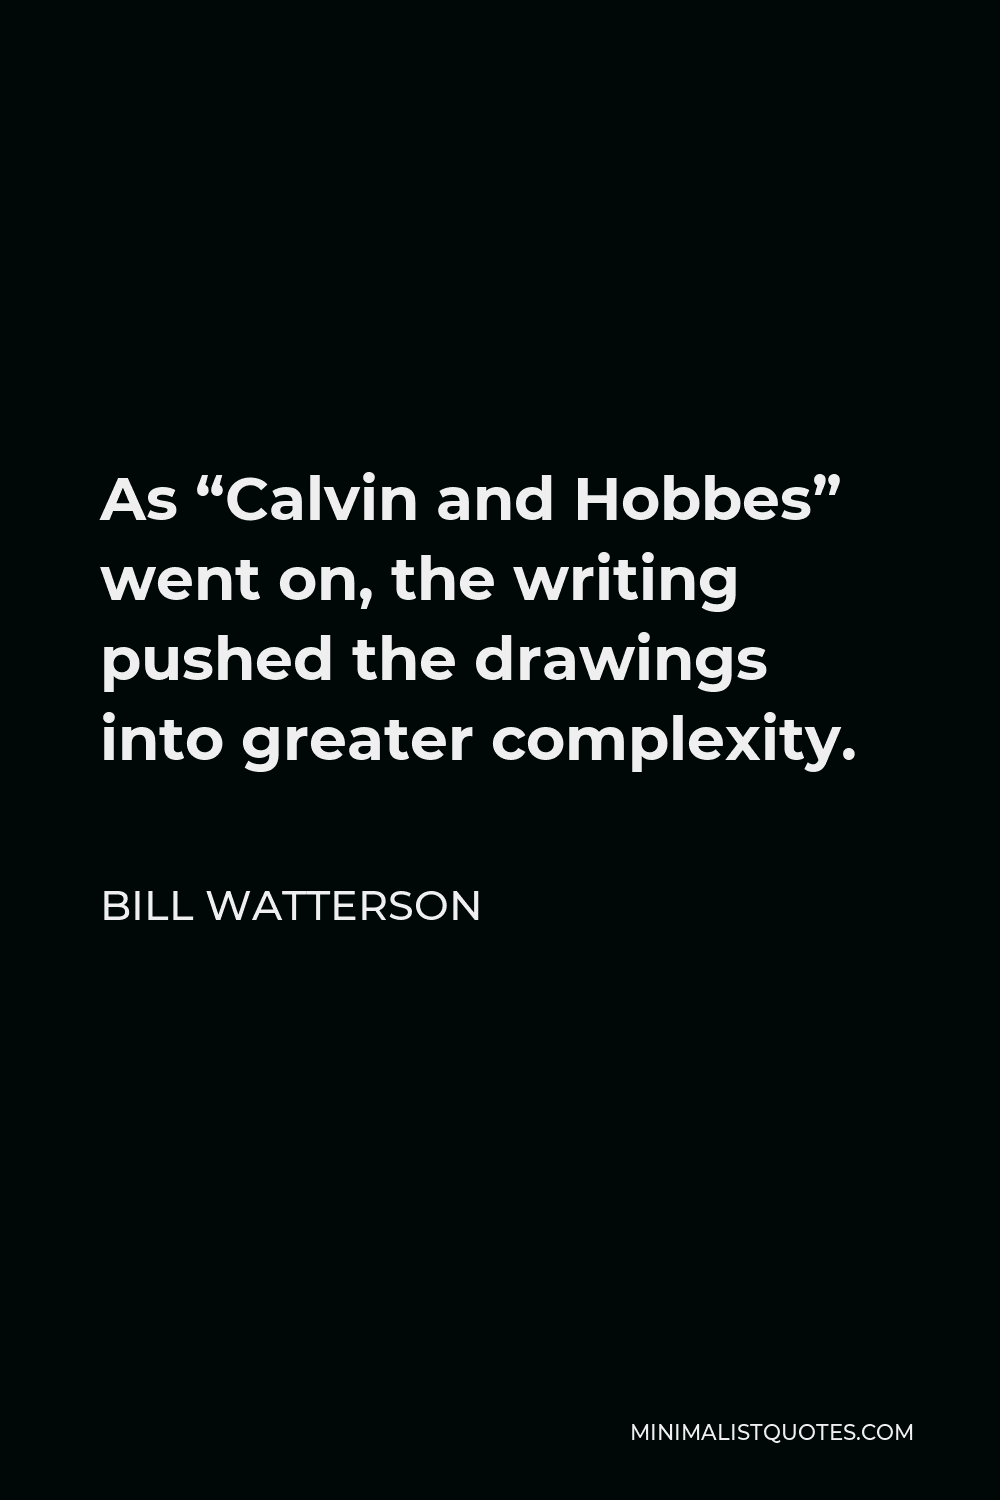 Bill Watterson Quote - As “Calvin and Hobbes” went on, the writing pushed the drawings into greater complexity.